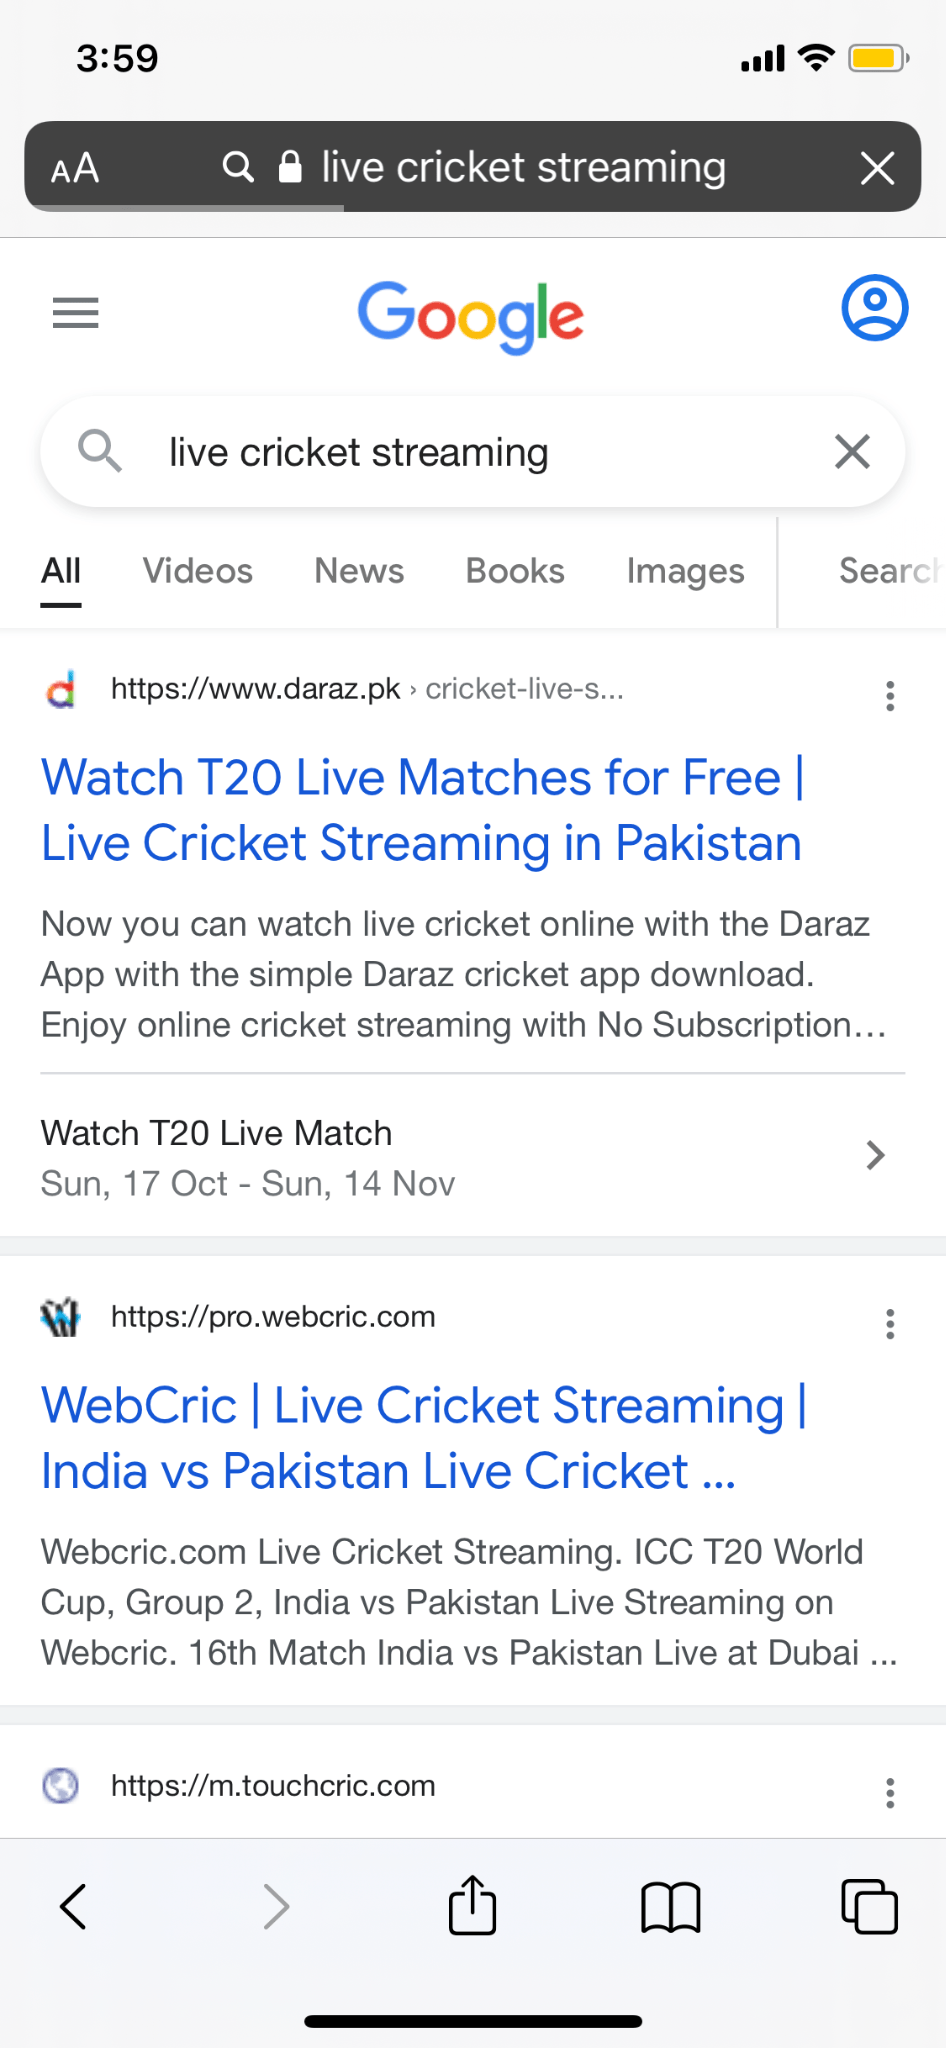 Daraz and ICC T20 Worldcup